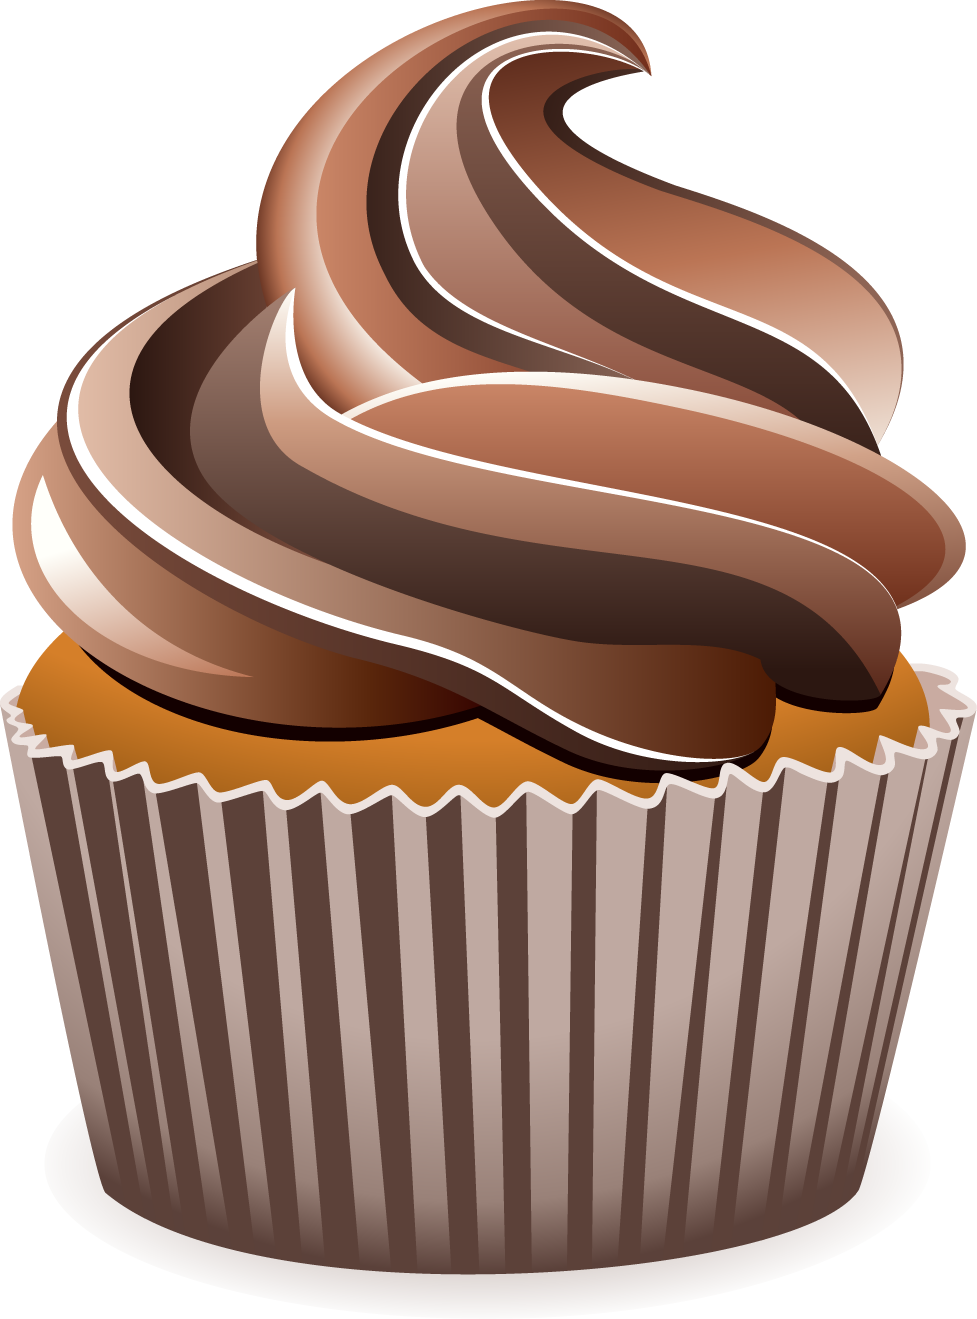 Cupcake clipart free download free clipart images 3